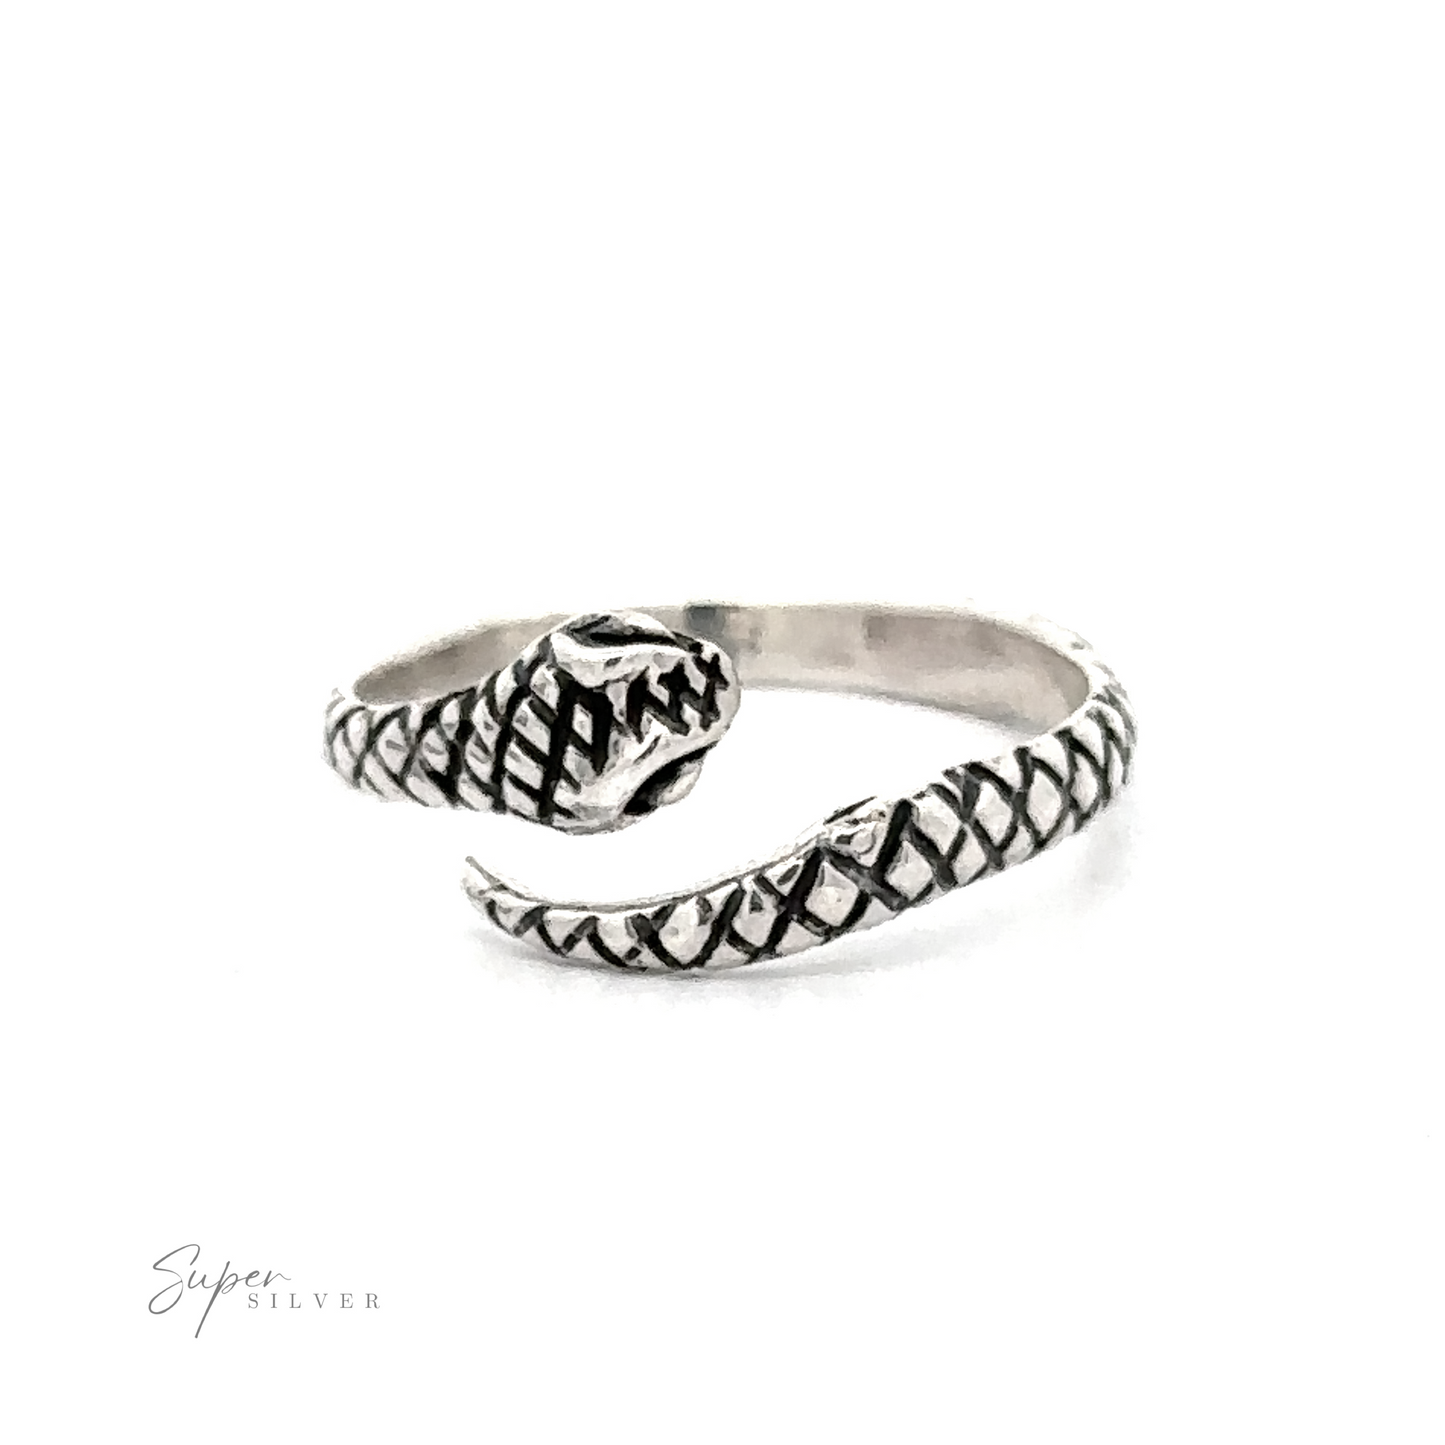 Adjustable snake ring with large eyes, detailed scale texture, coiled body, and the head facing one end, displayed against a plain white background.